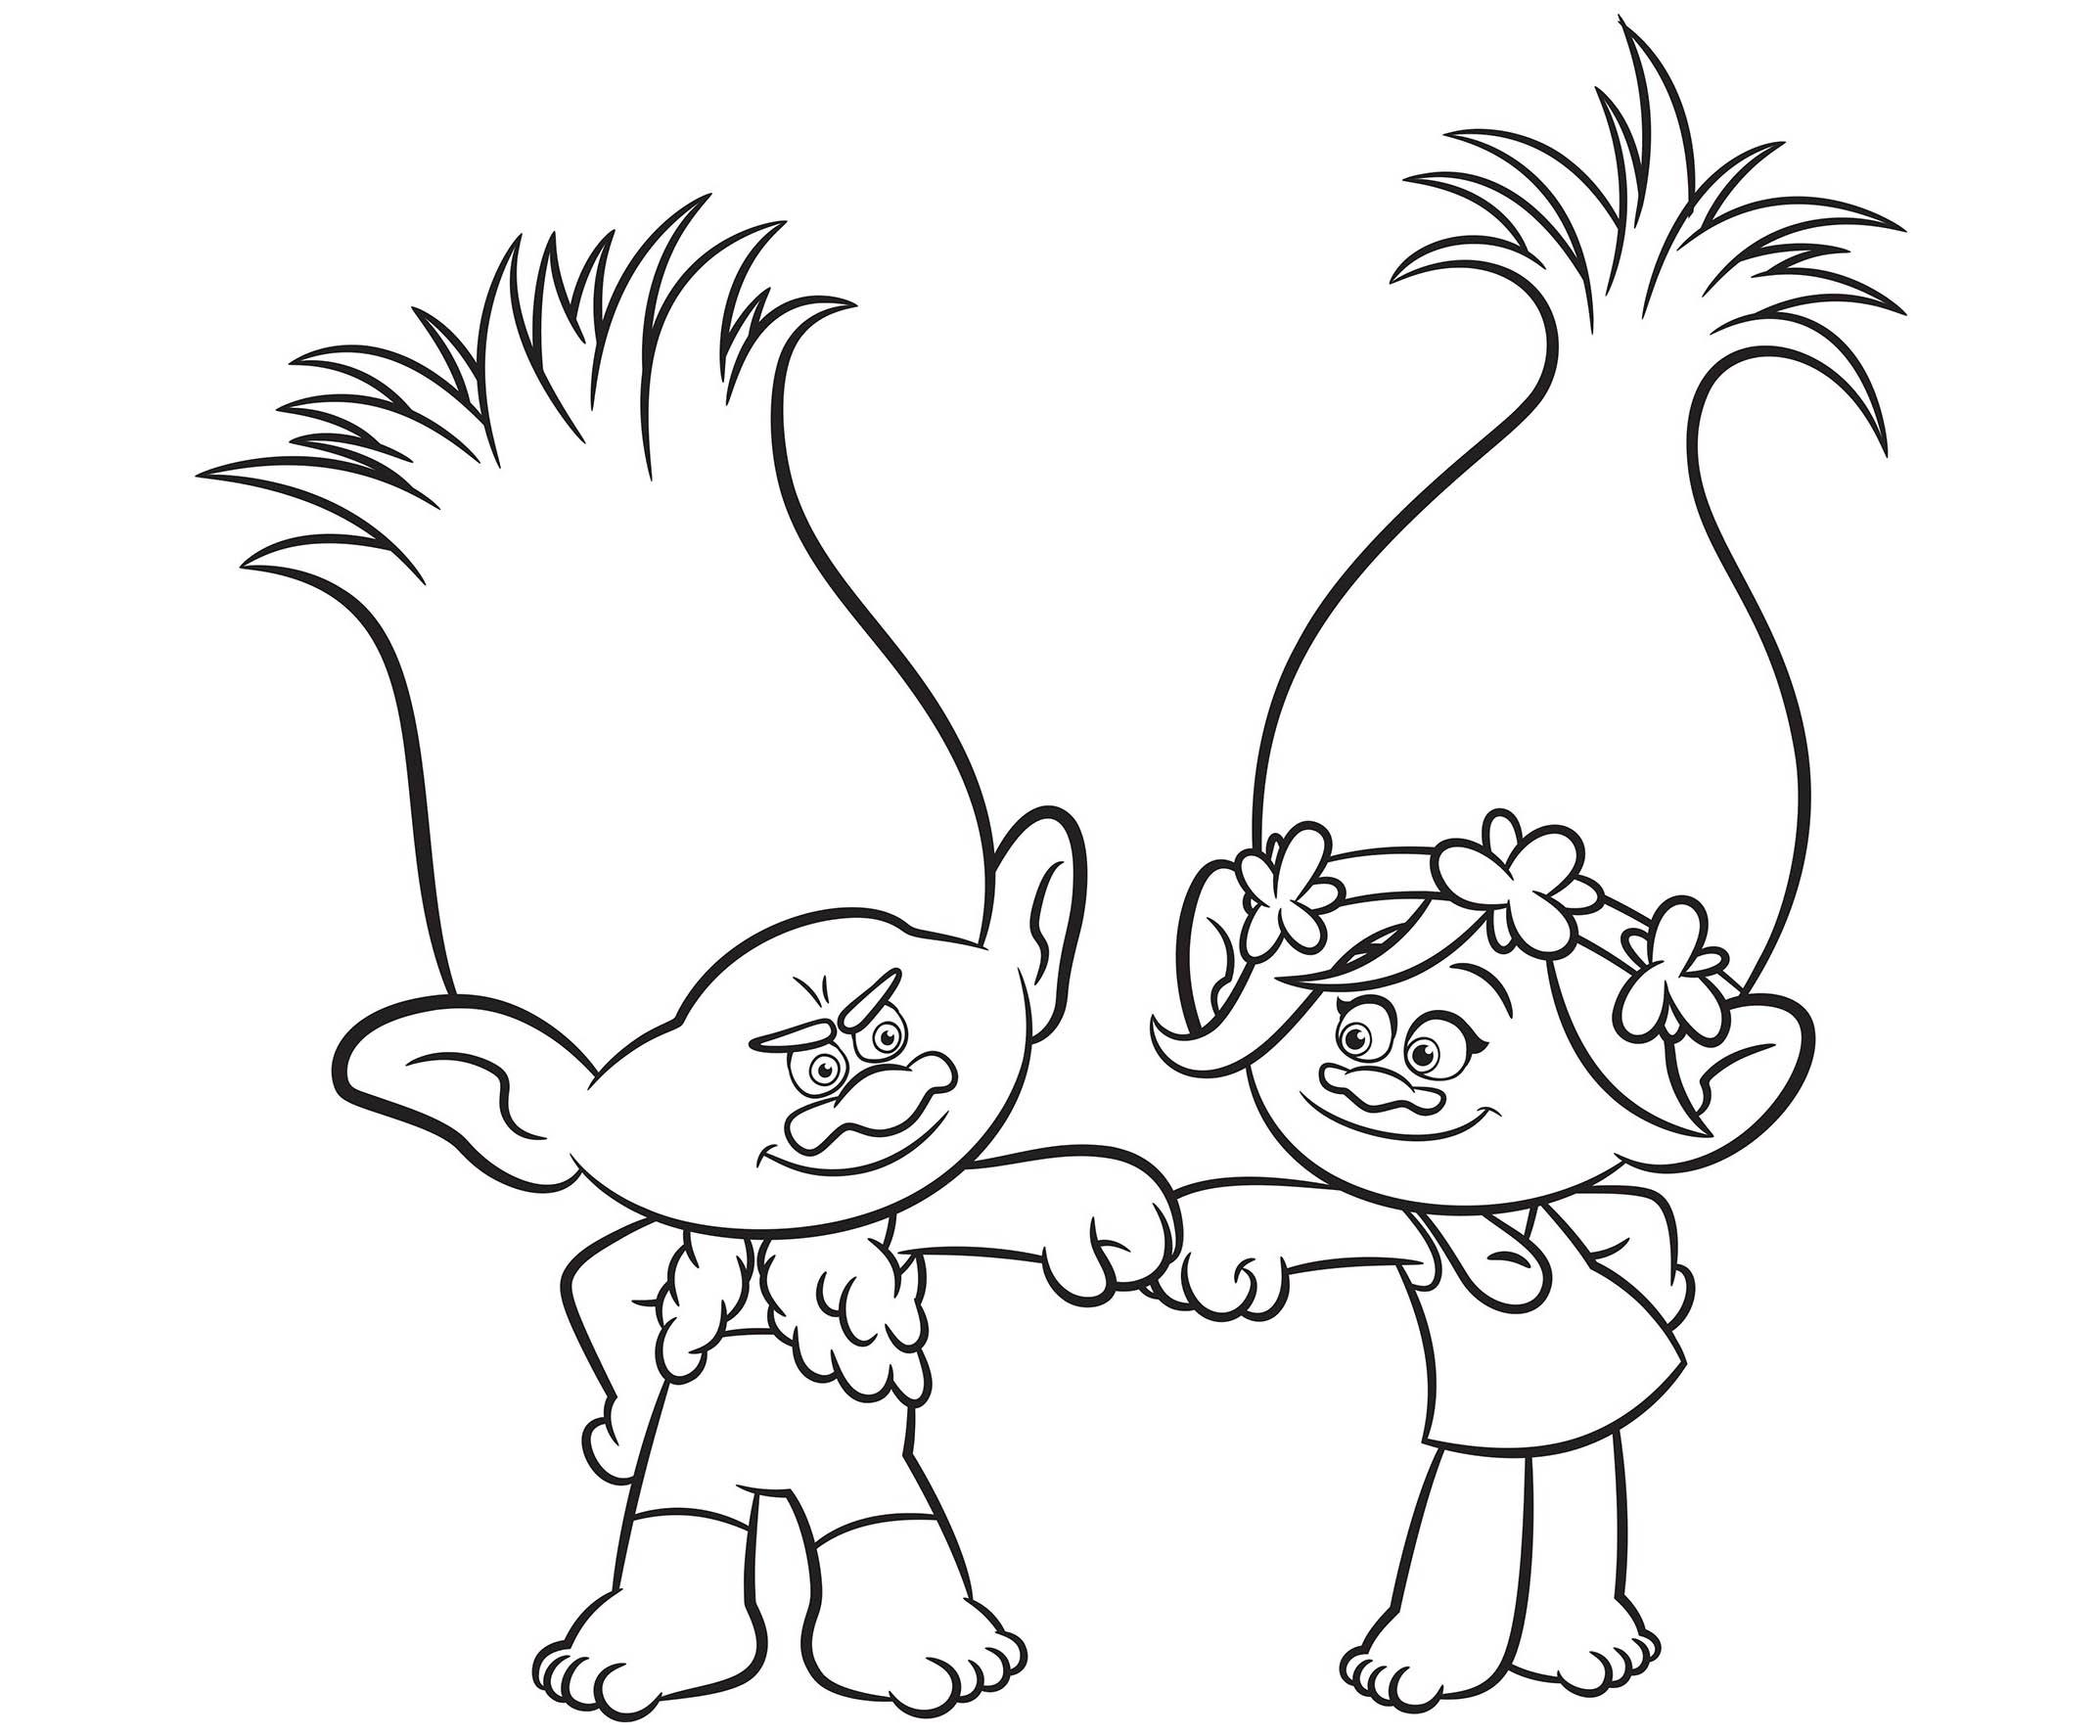 850 Coloring Pages For Trolls Download Free Images